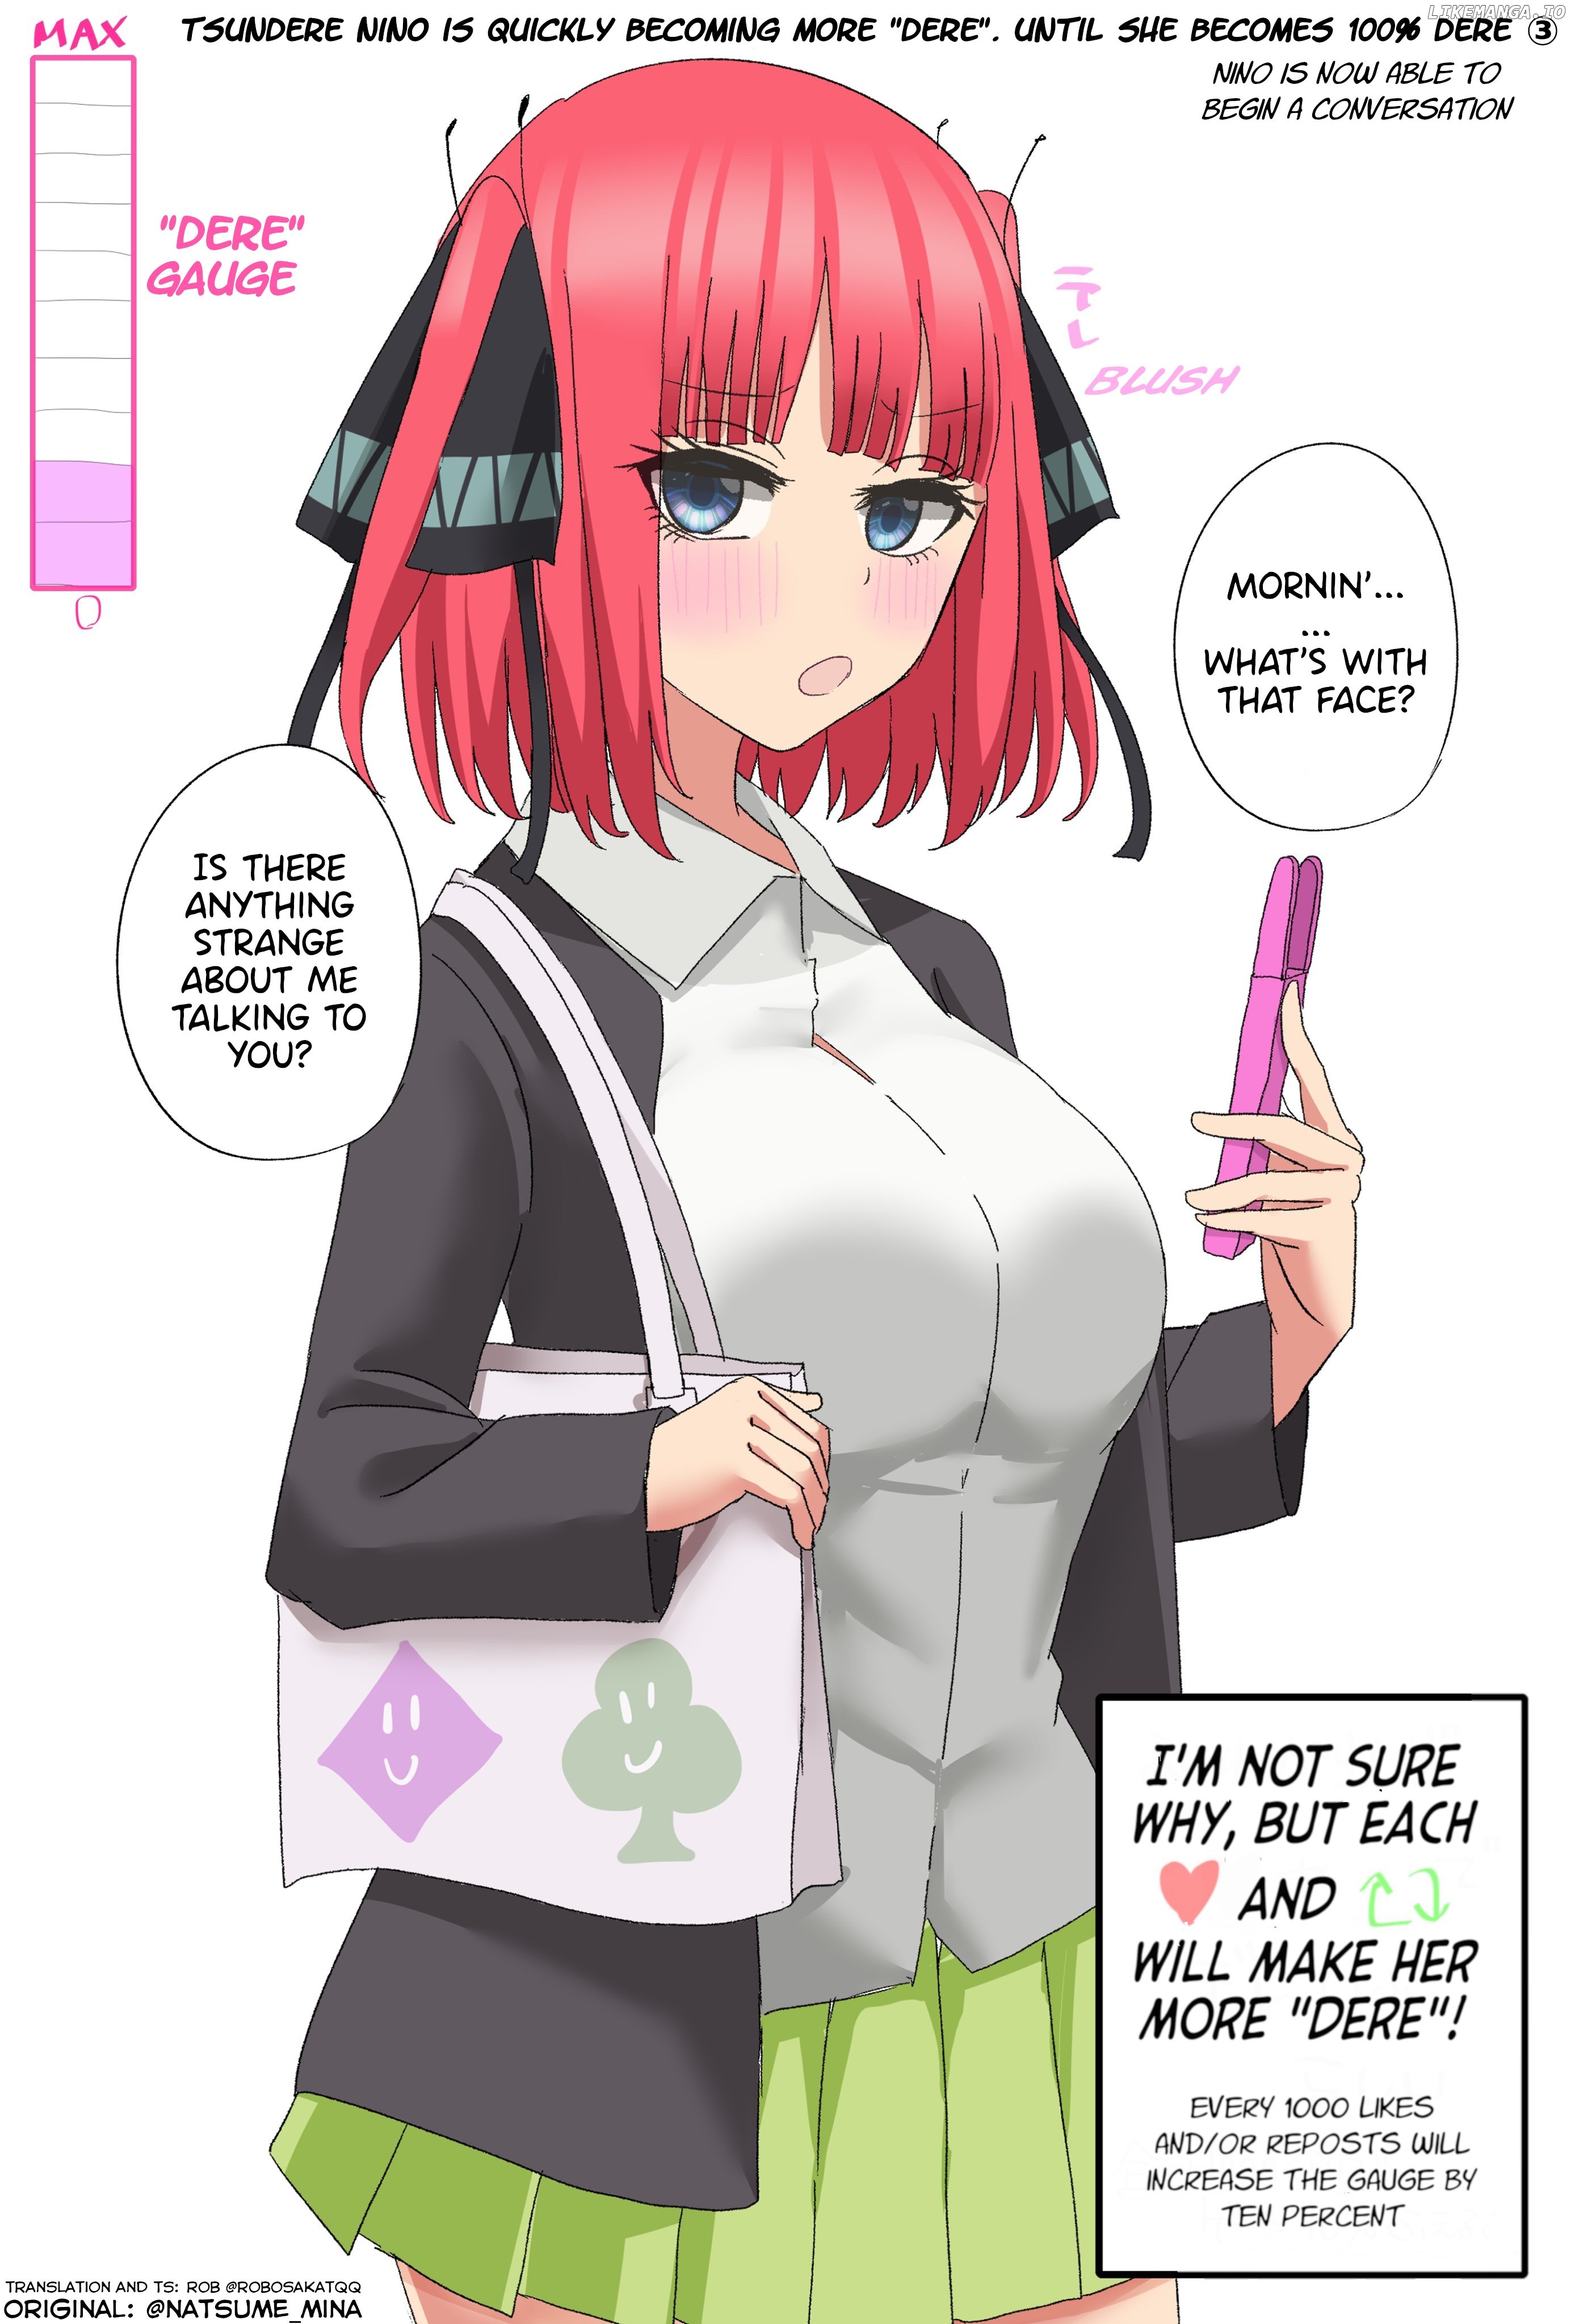 5Toubun No Hanayome - Tsundere Nino Rapidly Becomes More And More "dere" Through Likes And Reposts (Doujinshi) chapter 3 - page 1